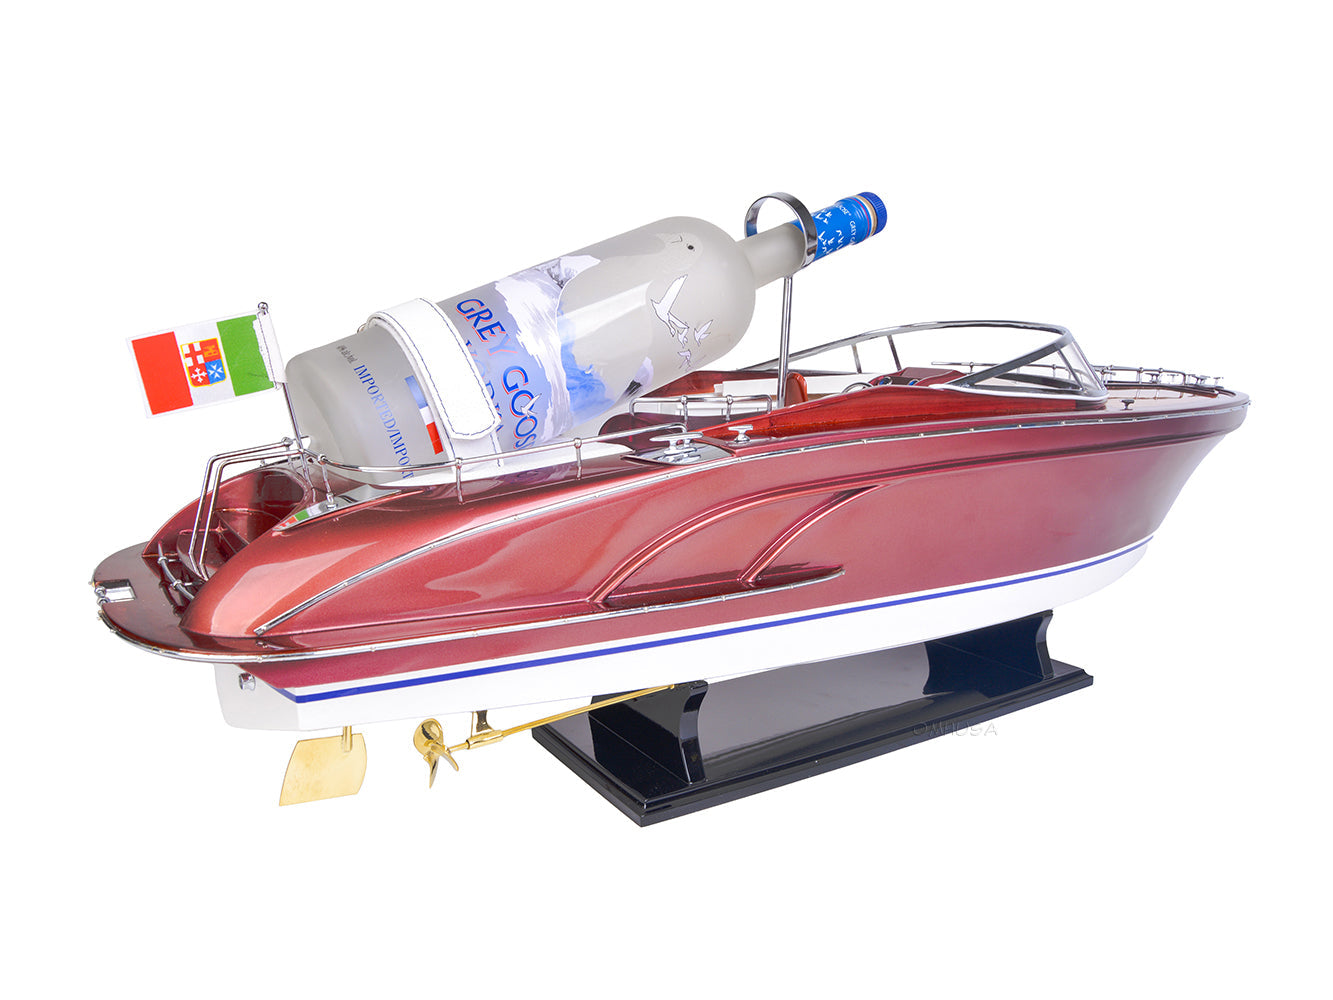 ALDO Hobbies & Creative Arts> Collectibles> Scale Model Luxurious Riva Rivarama Speed Boat and Wine Holder Wood Model Boat Assembled